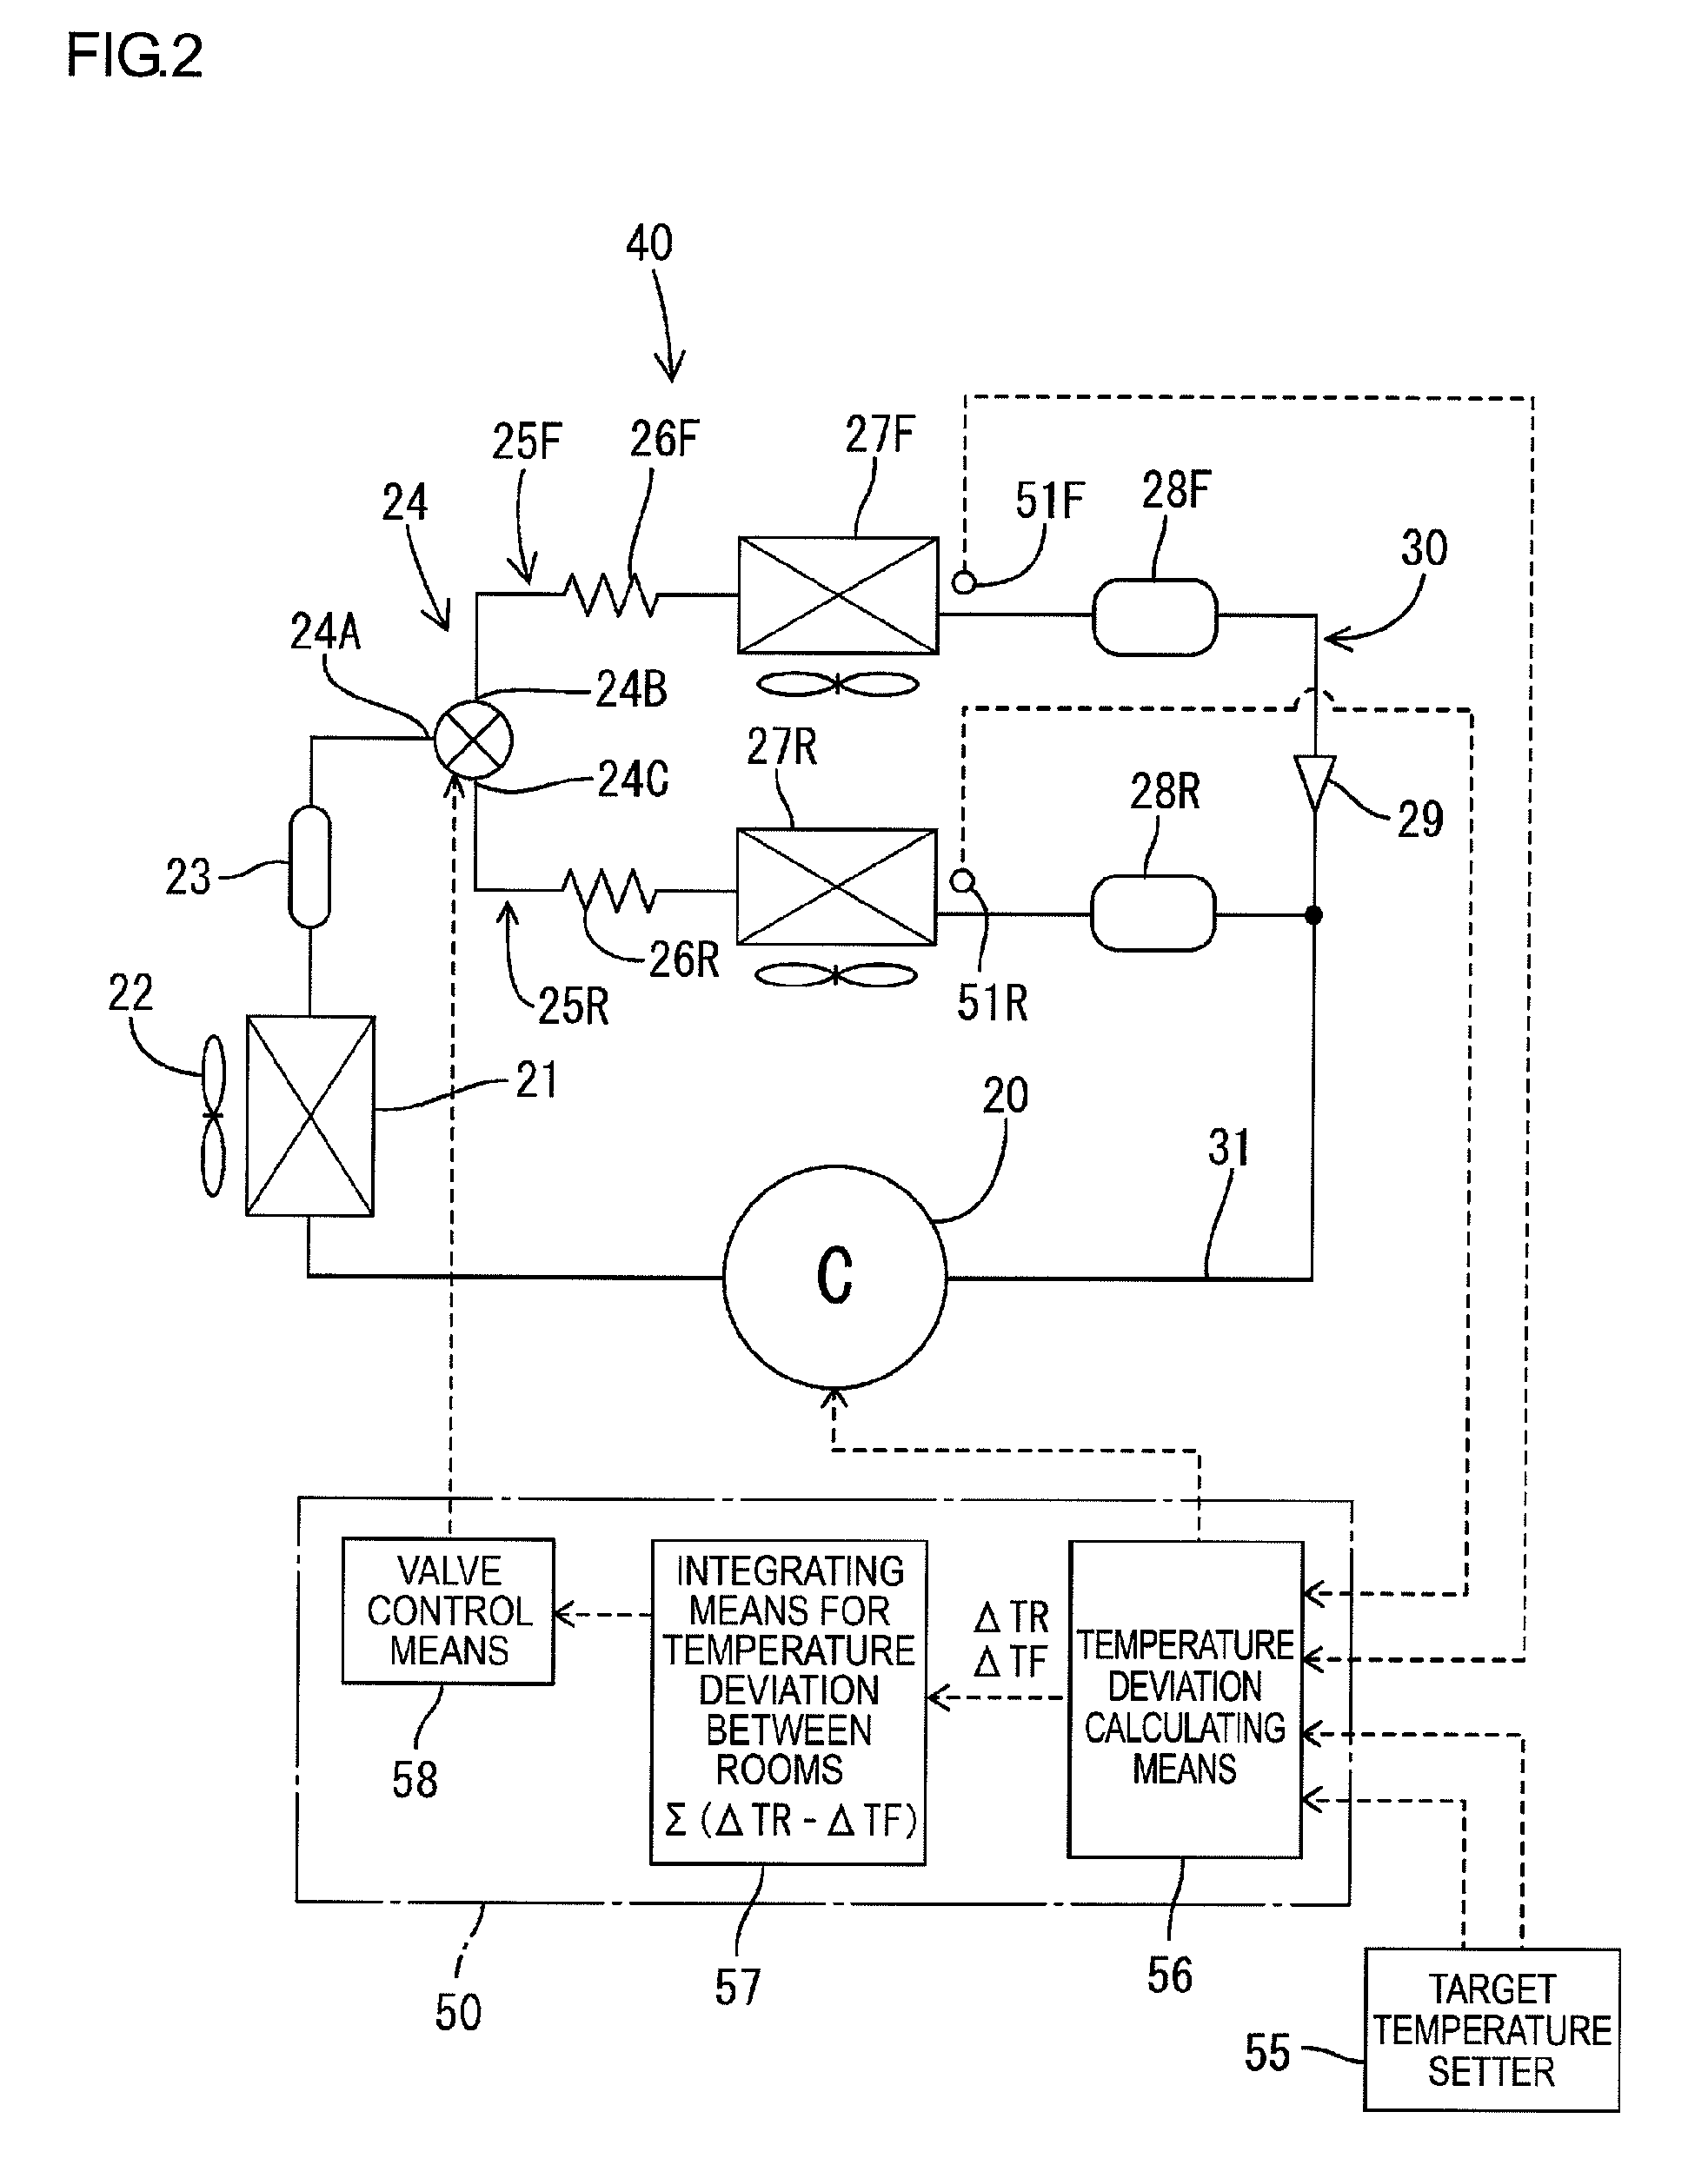 Cooling storage and method of operating the same